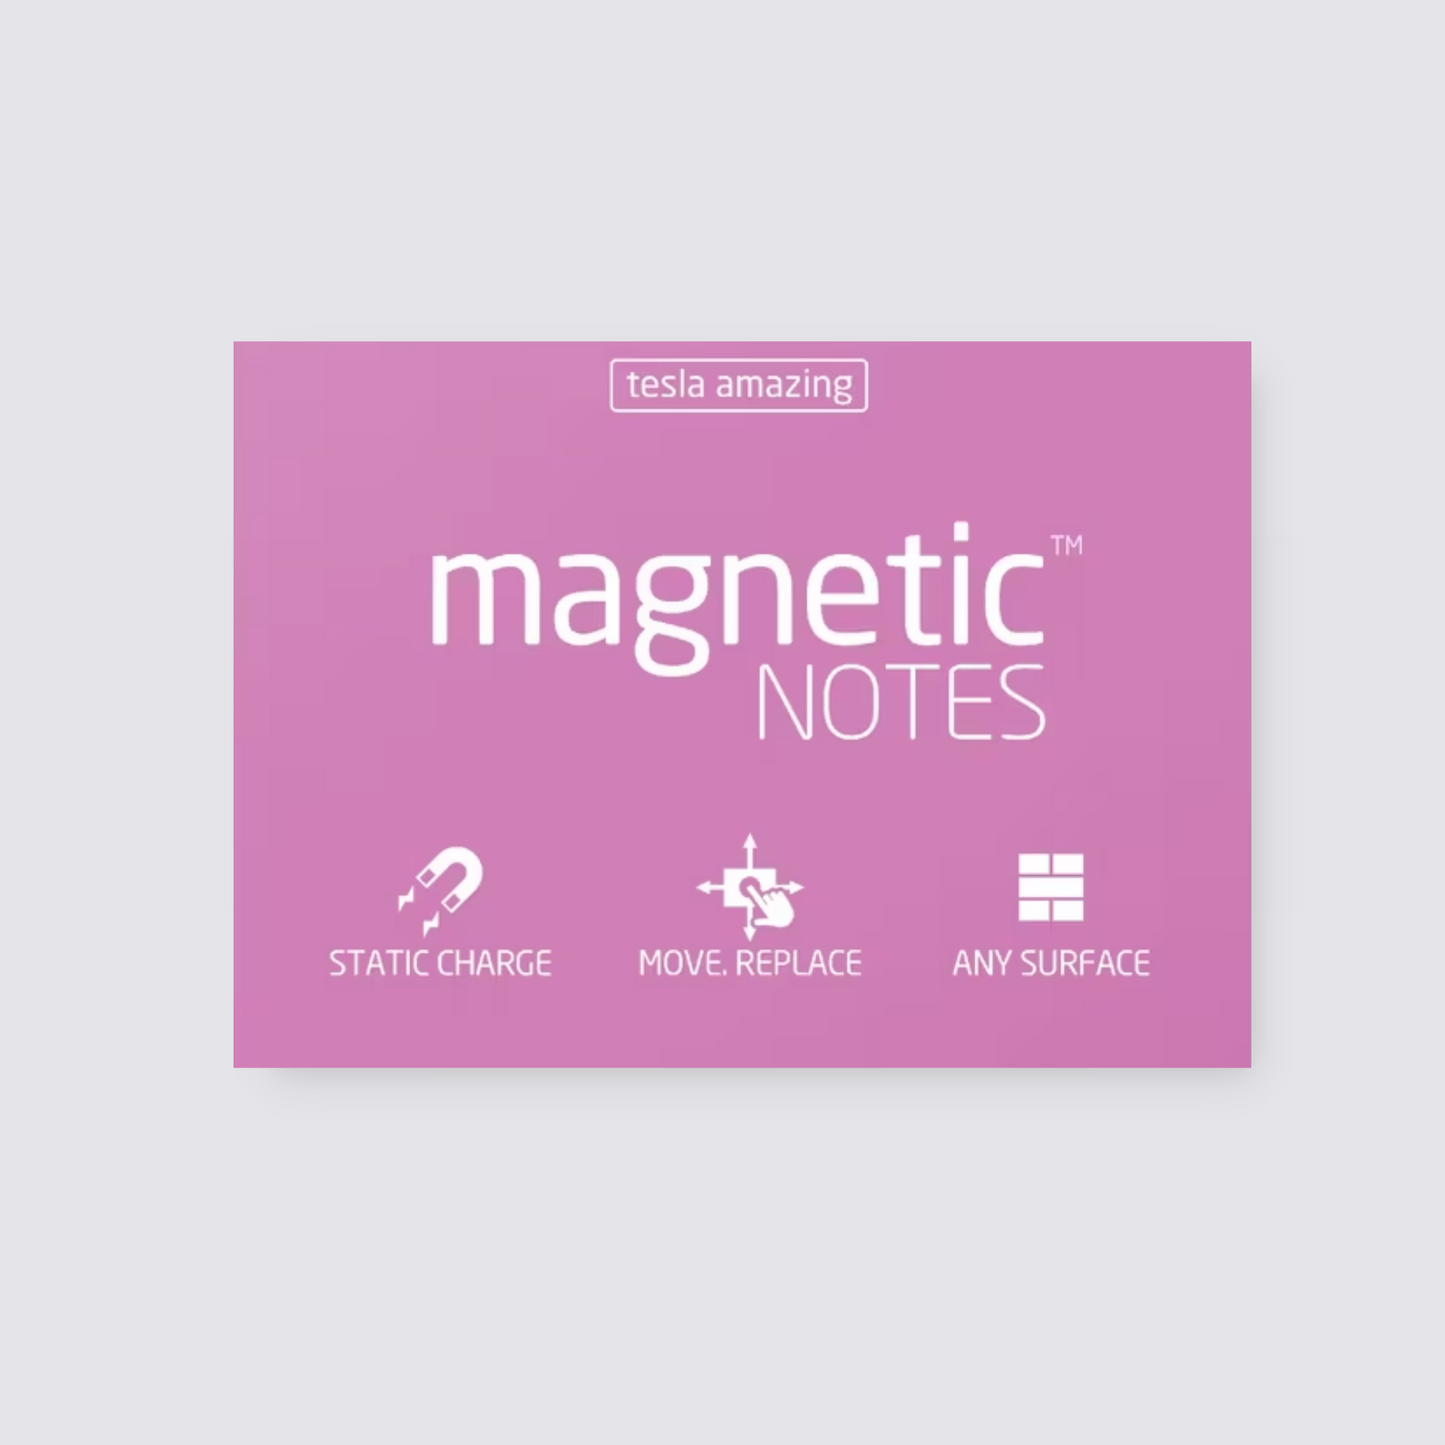 Magnetic notes in pink